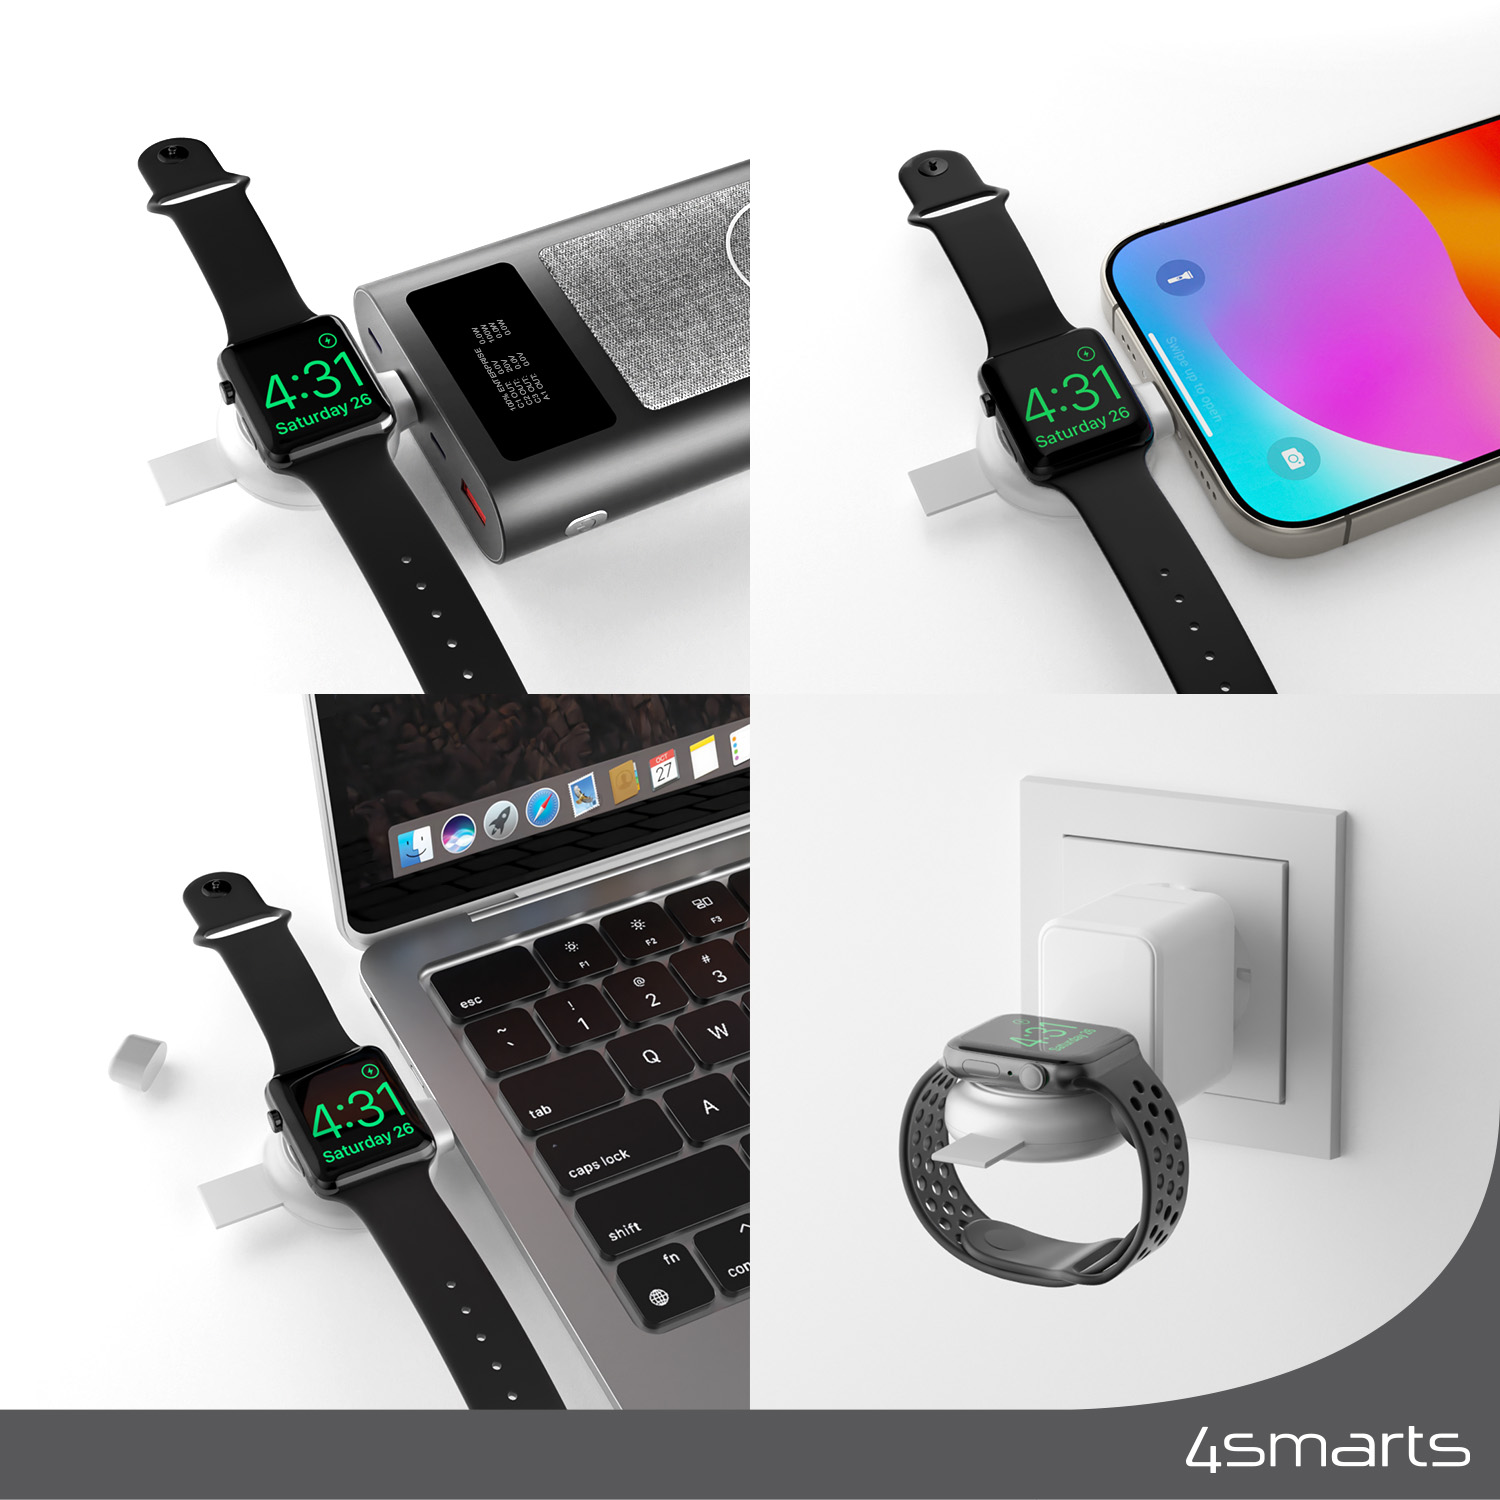 With the 4smarts MFi Fast Charger for Apple Watch, you can easily connect your Apple Watch to your USB-C charger, laptop, iPhone/iPad or even in the car with a USB-C car charger.